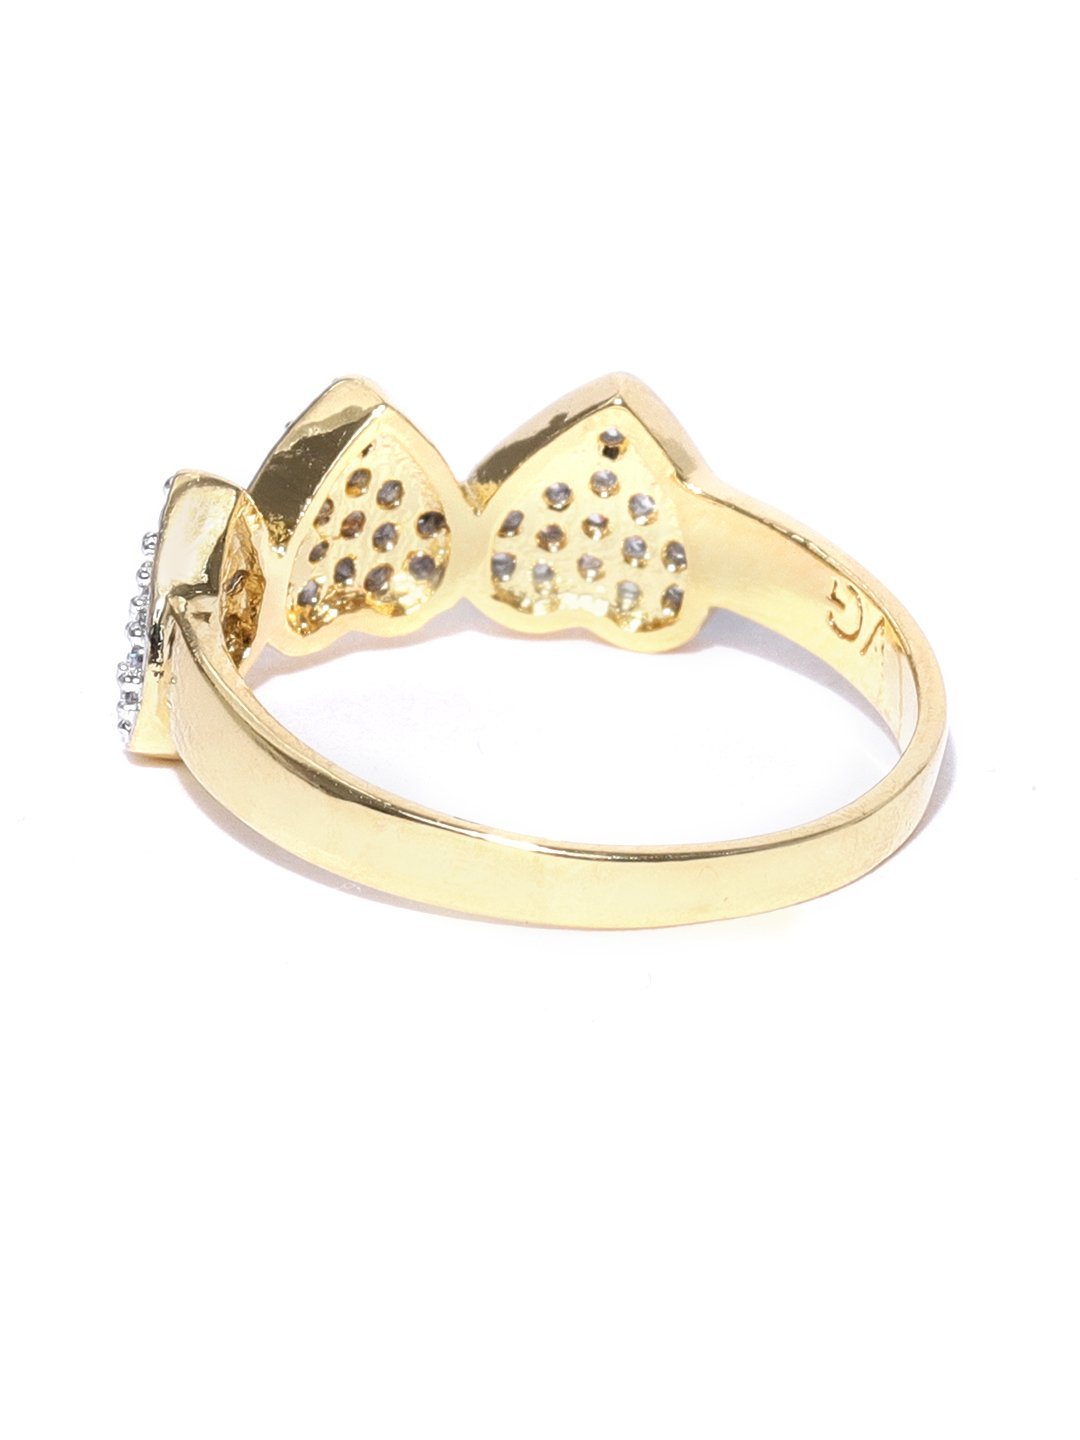 Women's Gold-Plated American Diamond Studded Bracelet With Finger Ring in Heart Pattern - Priyaasi